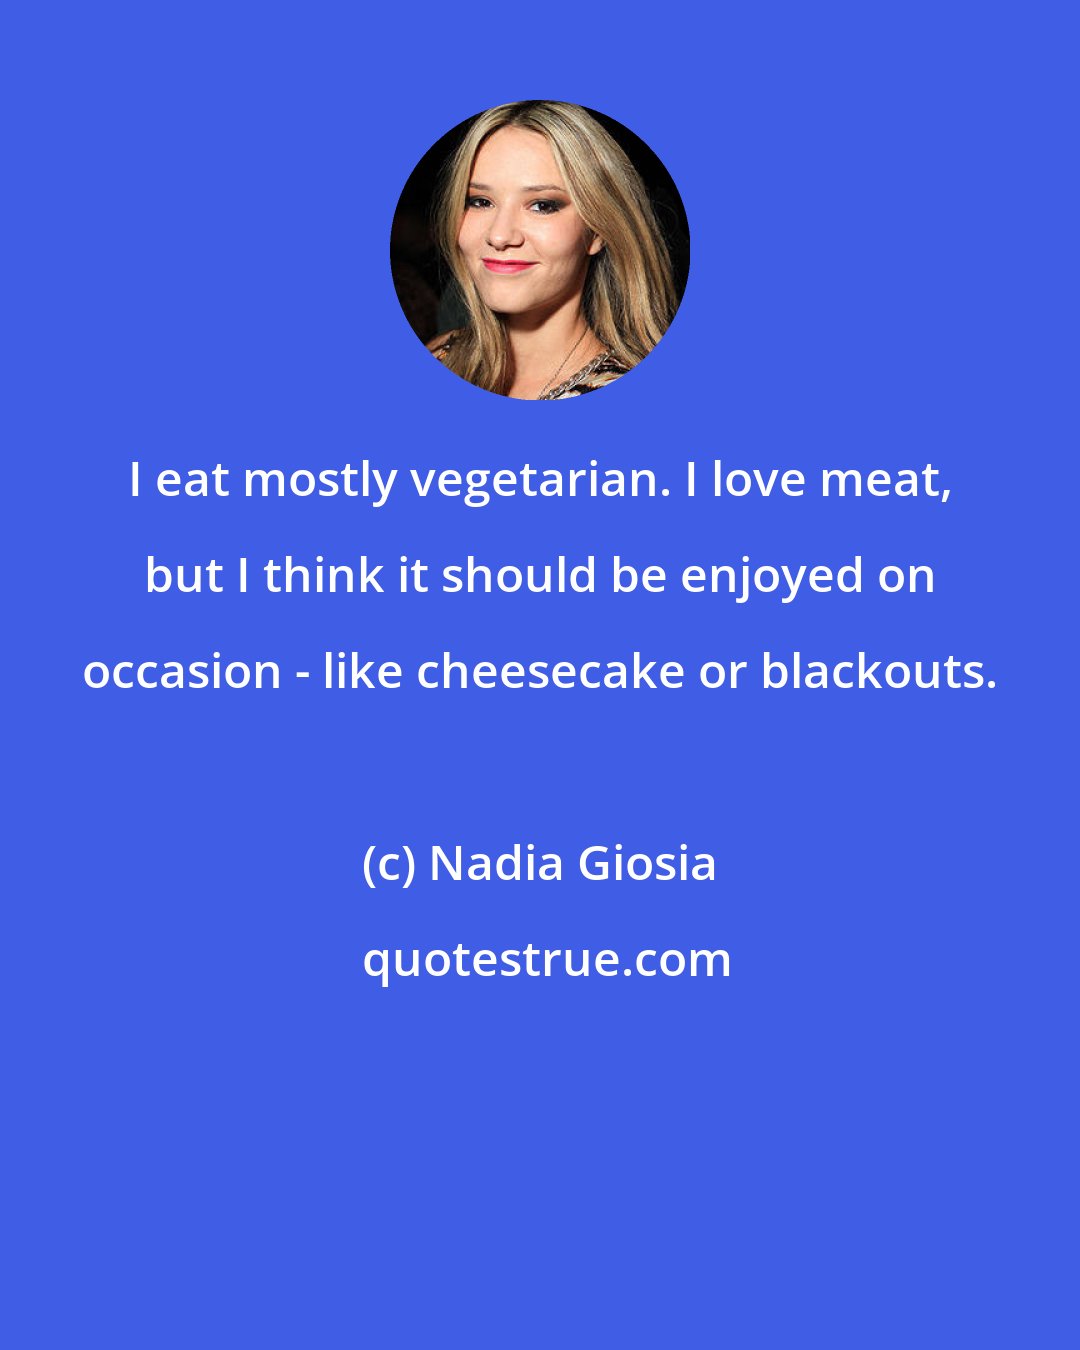 Nadia Giosia: I eat mostly vegetarian. I love meat, but I think it should be enjoyed on occasion - like cheesecake or blackouts.